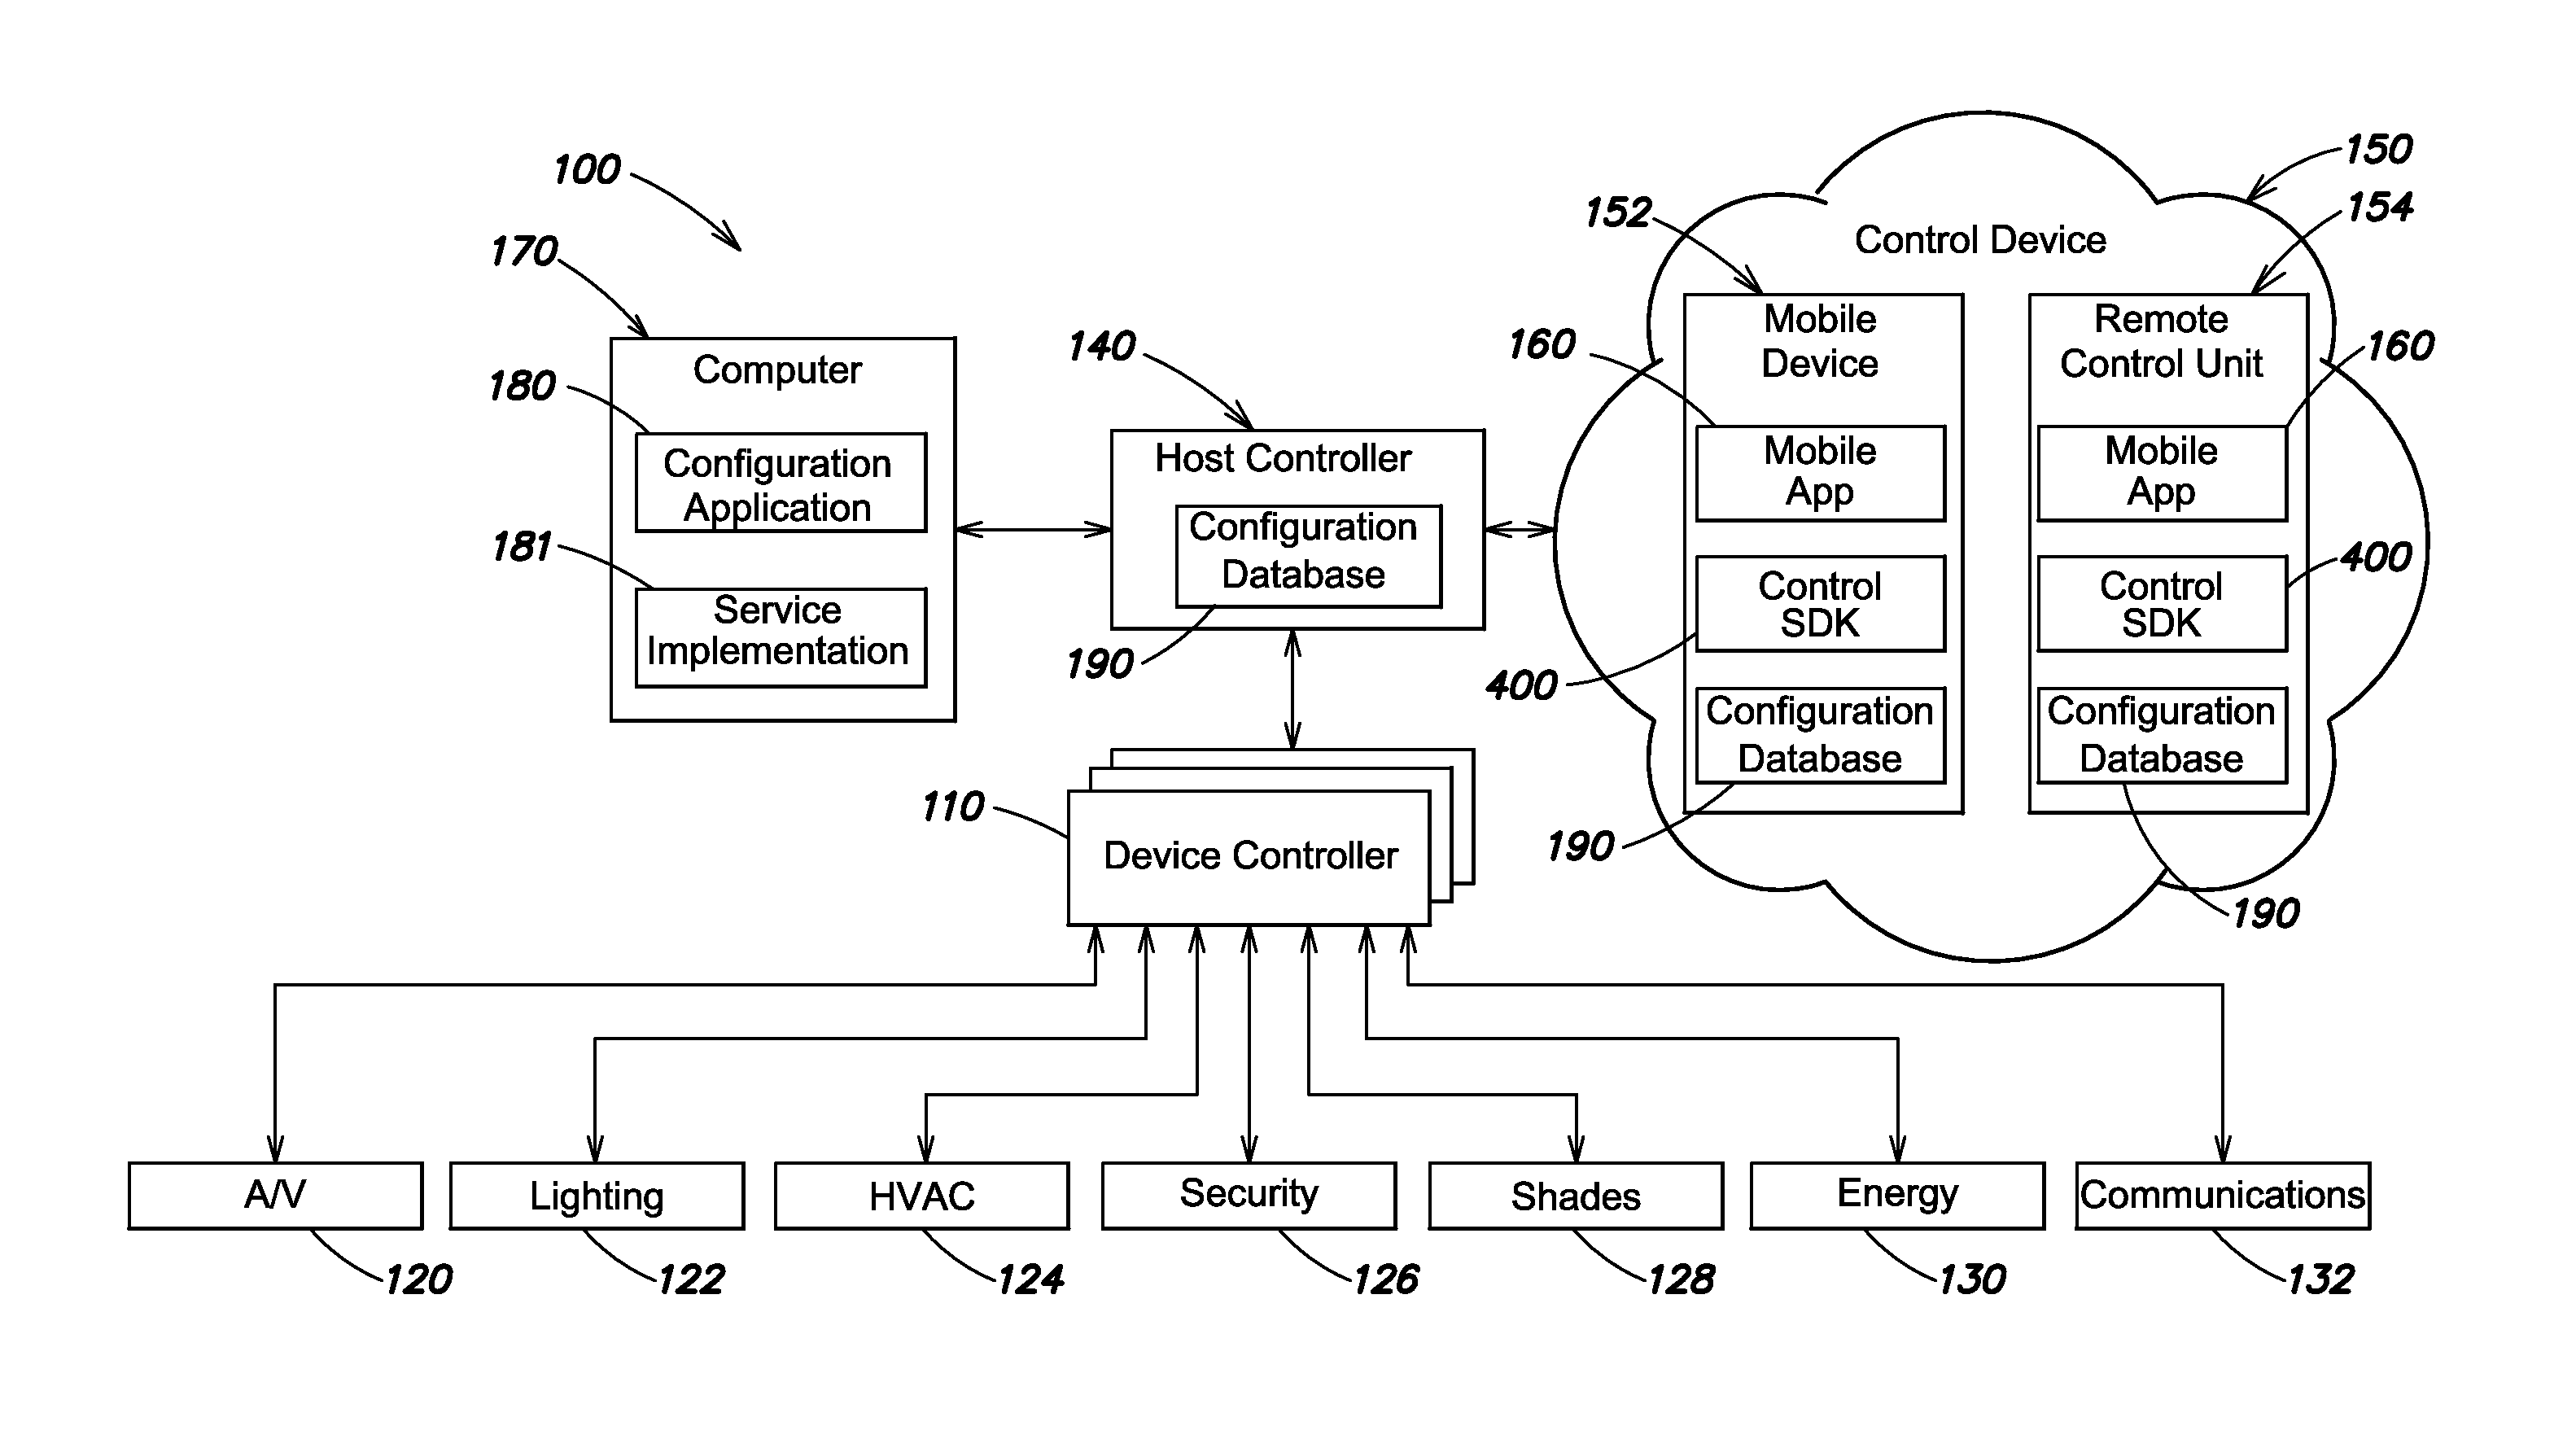 Providing a user interface for devices of a home automation system